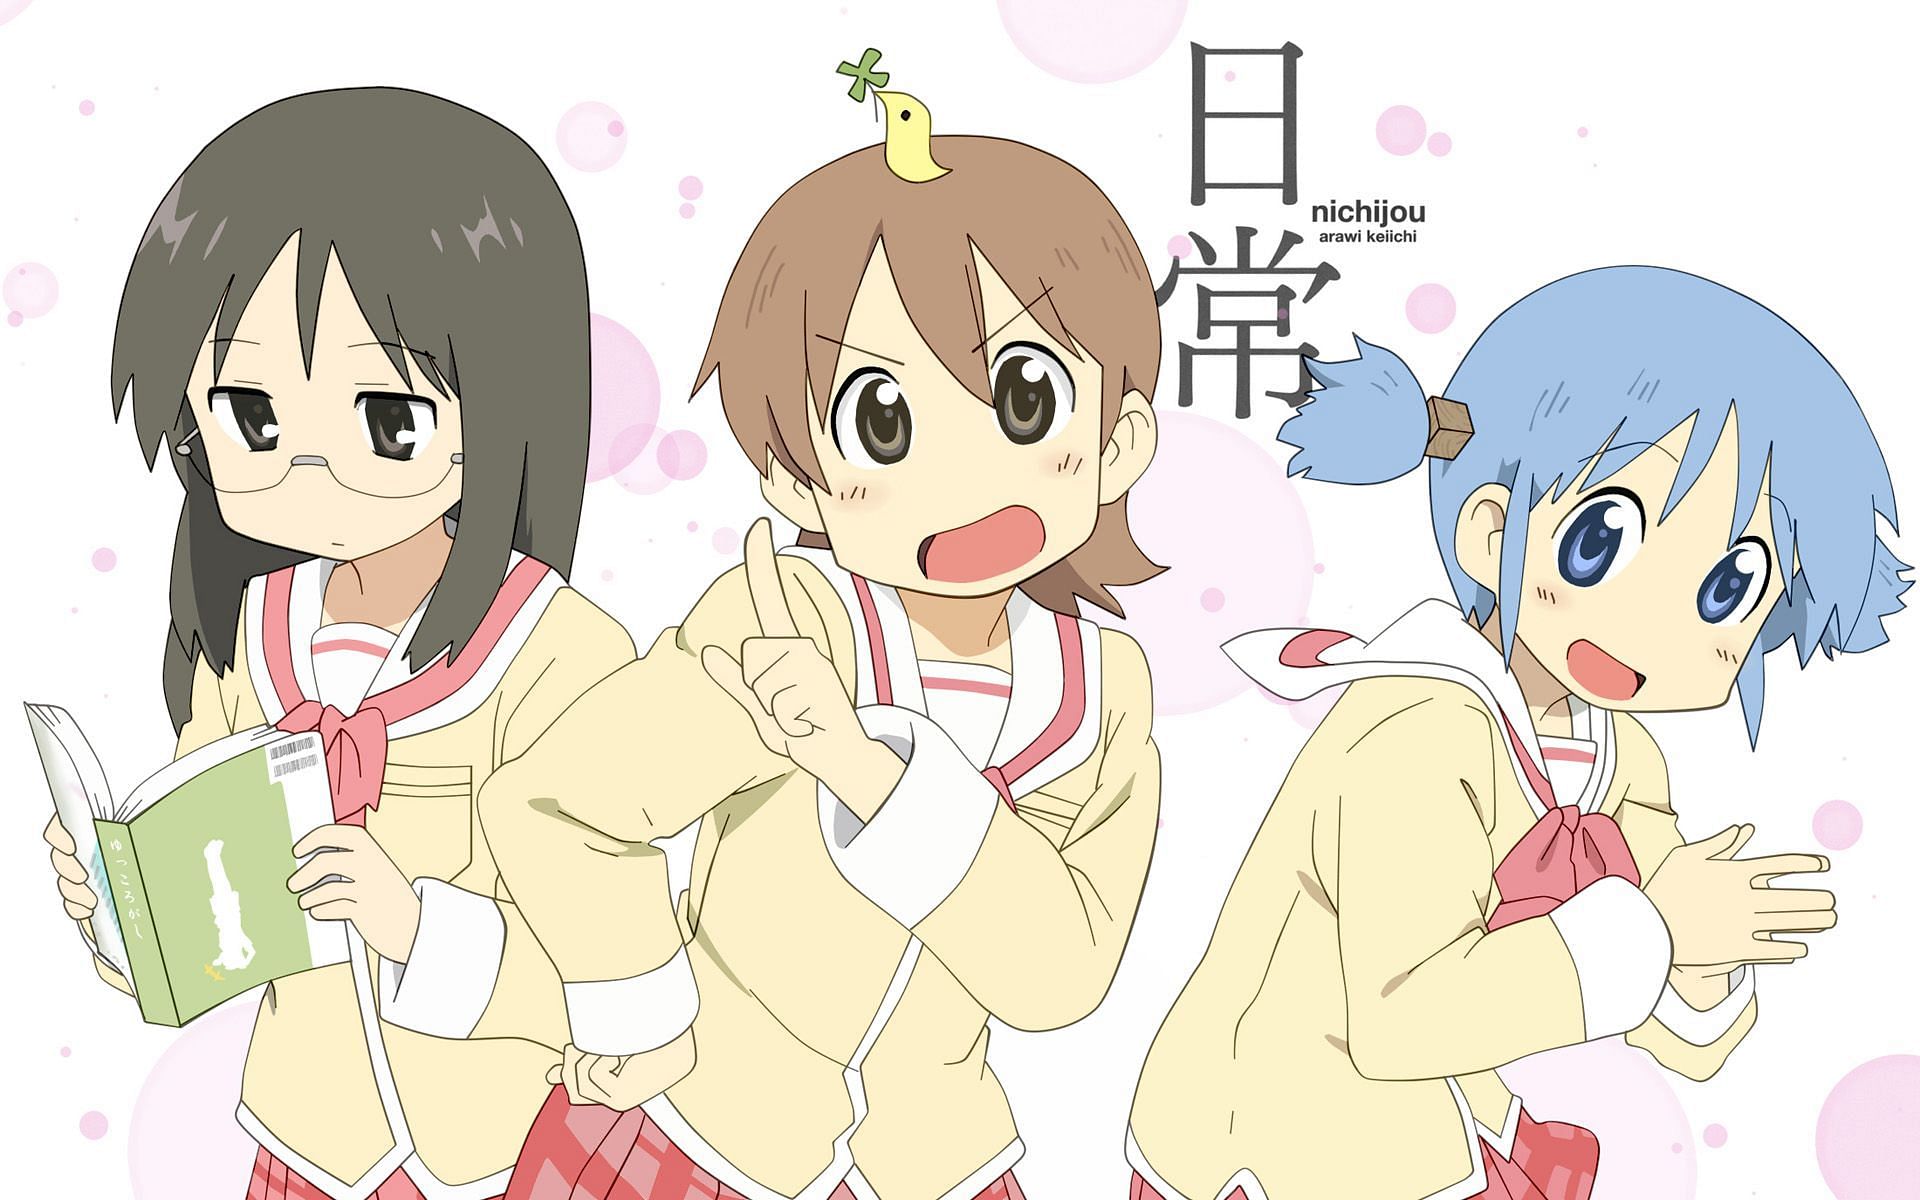 Official poster of Nichijou featuring the main characters (Image via Kyoto Animation)